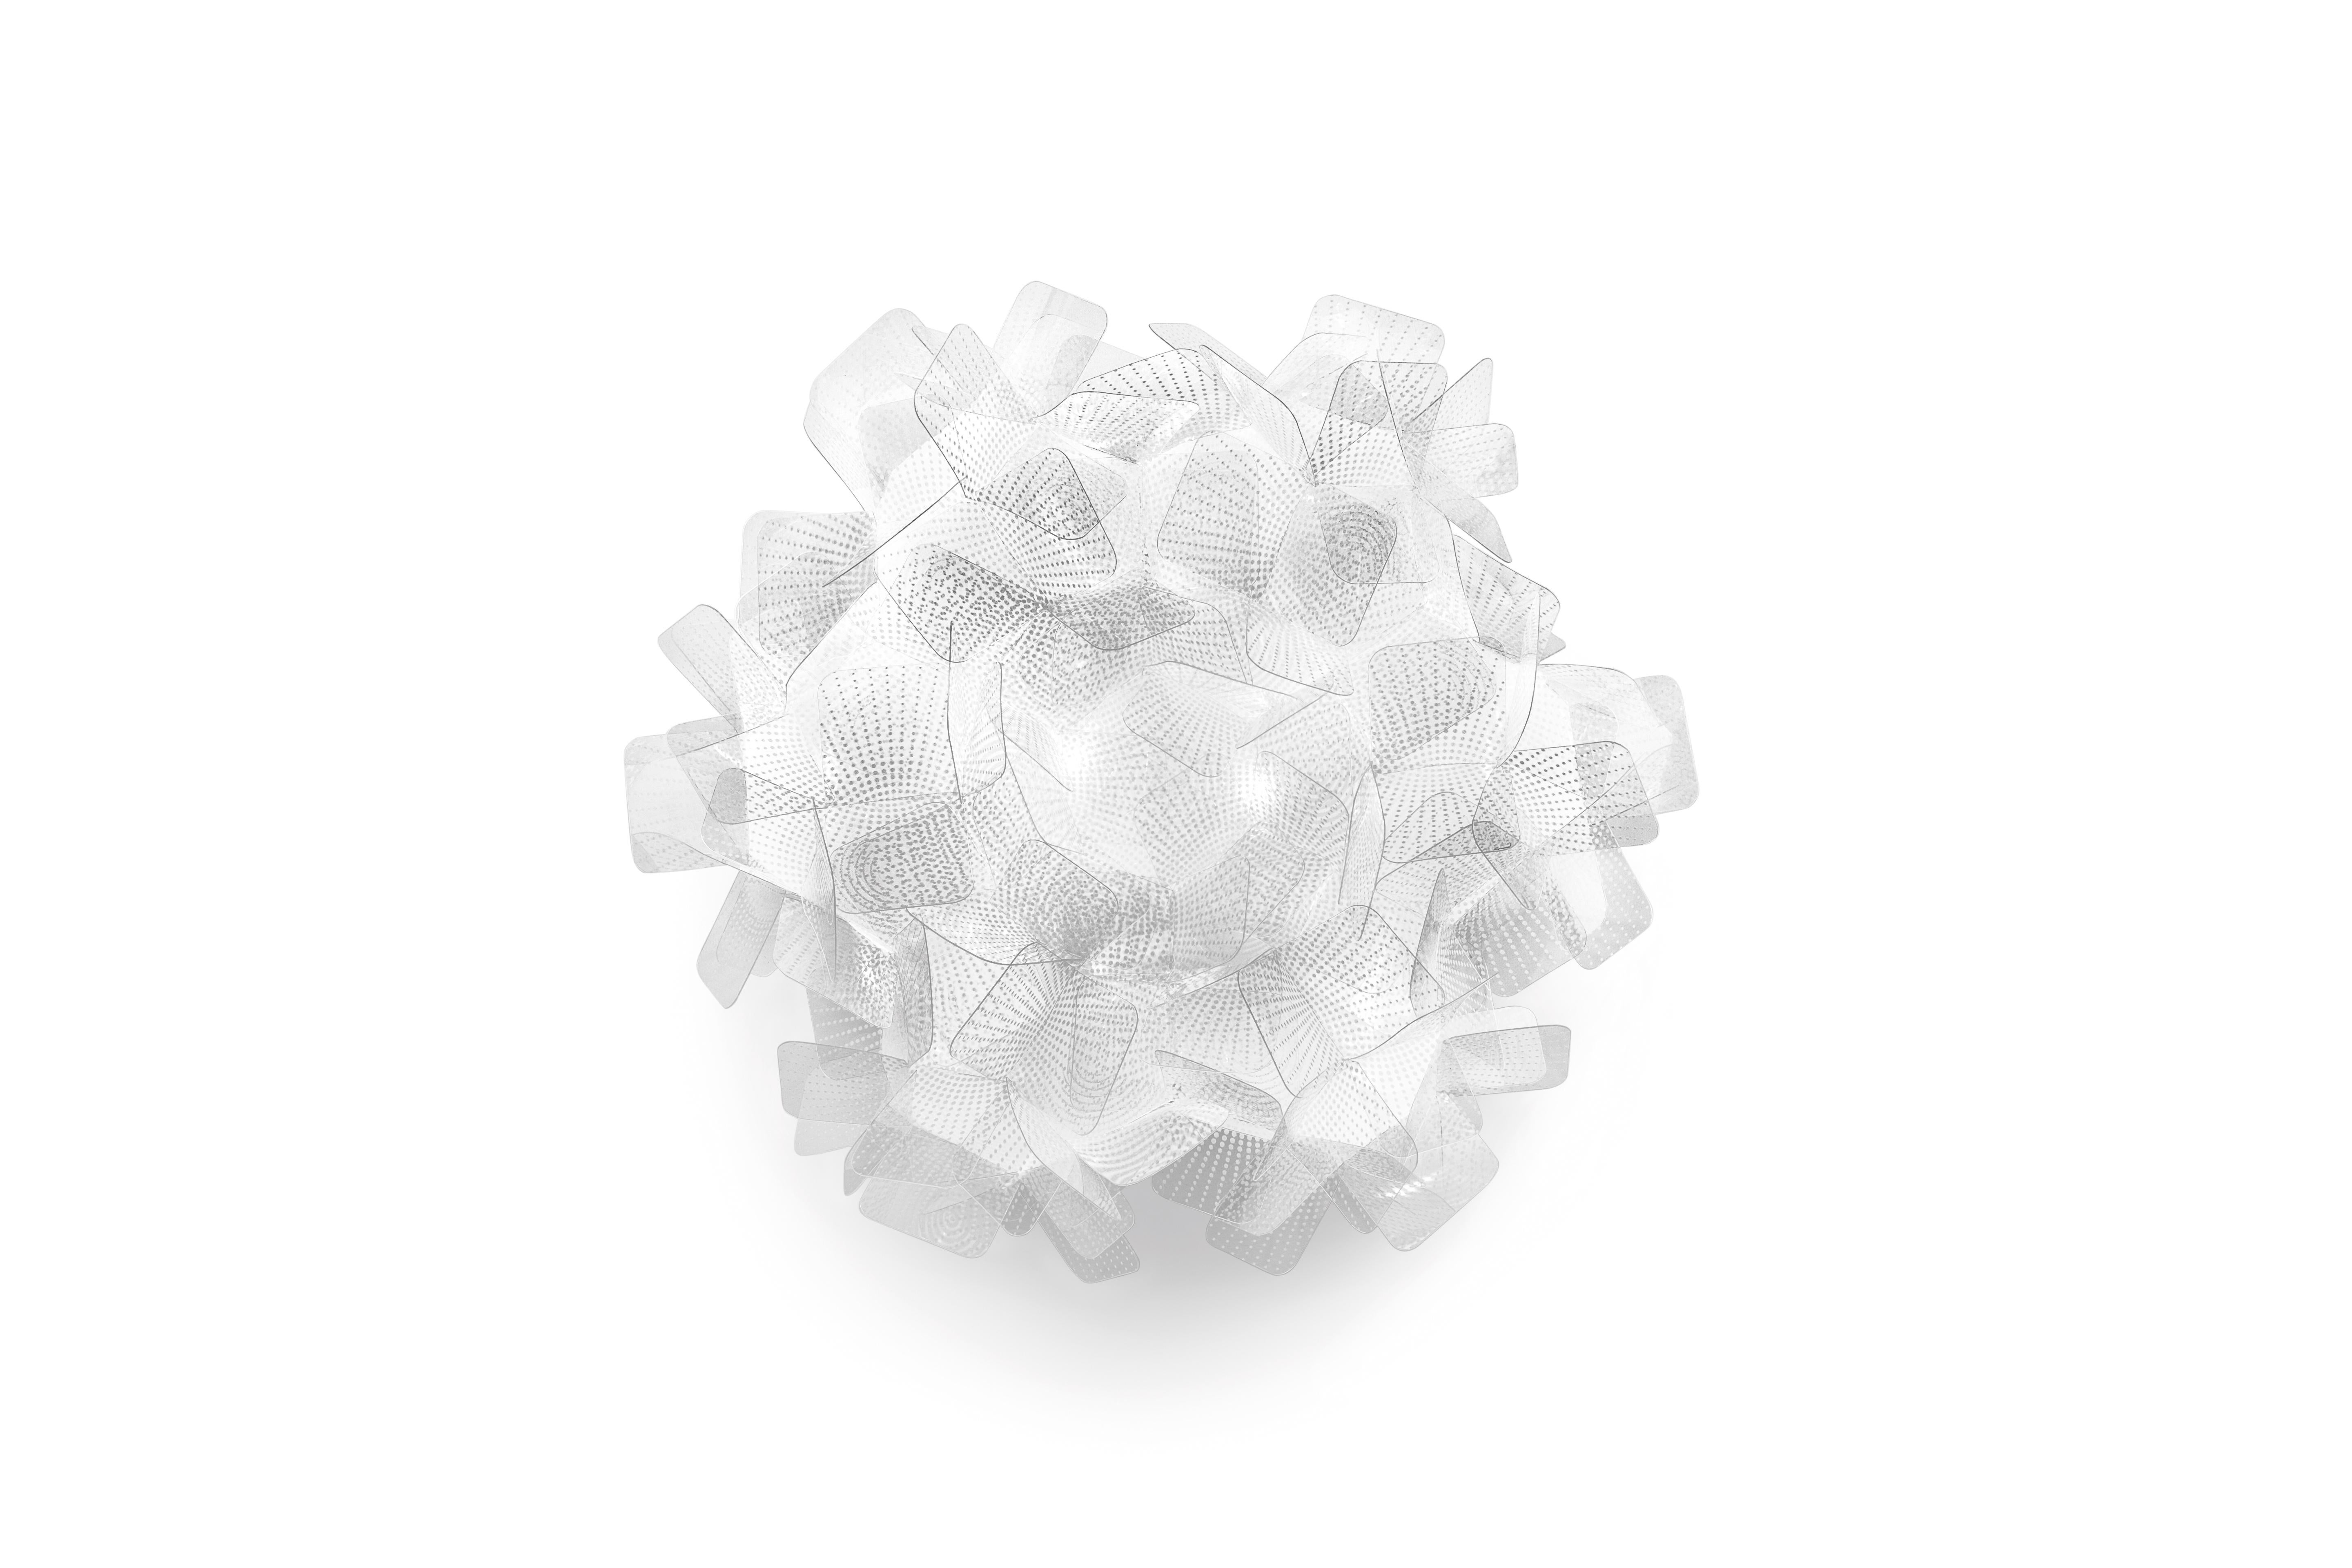 Handcrafted from interlocking Cristalflex petals, complete with a magnetic system that allows for easy installation and cleaning, Clizia Pixel ceiling (or wall sconce) is covered in a white, tech-inspired pattern. A white dusting inside the